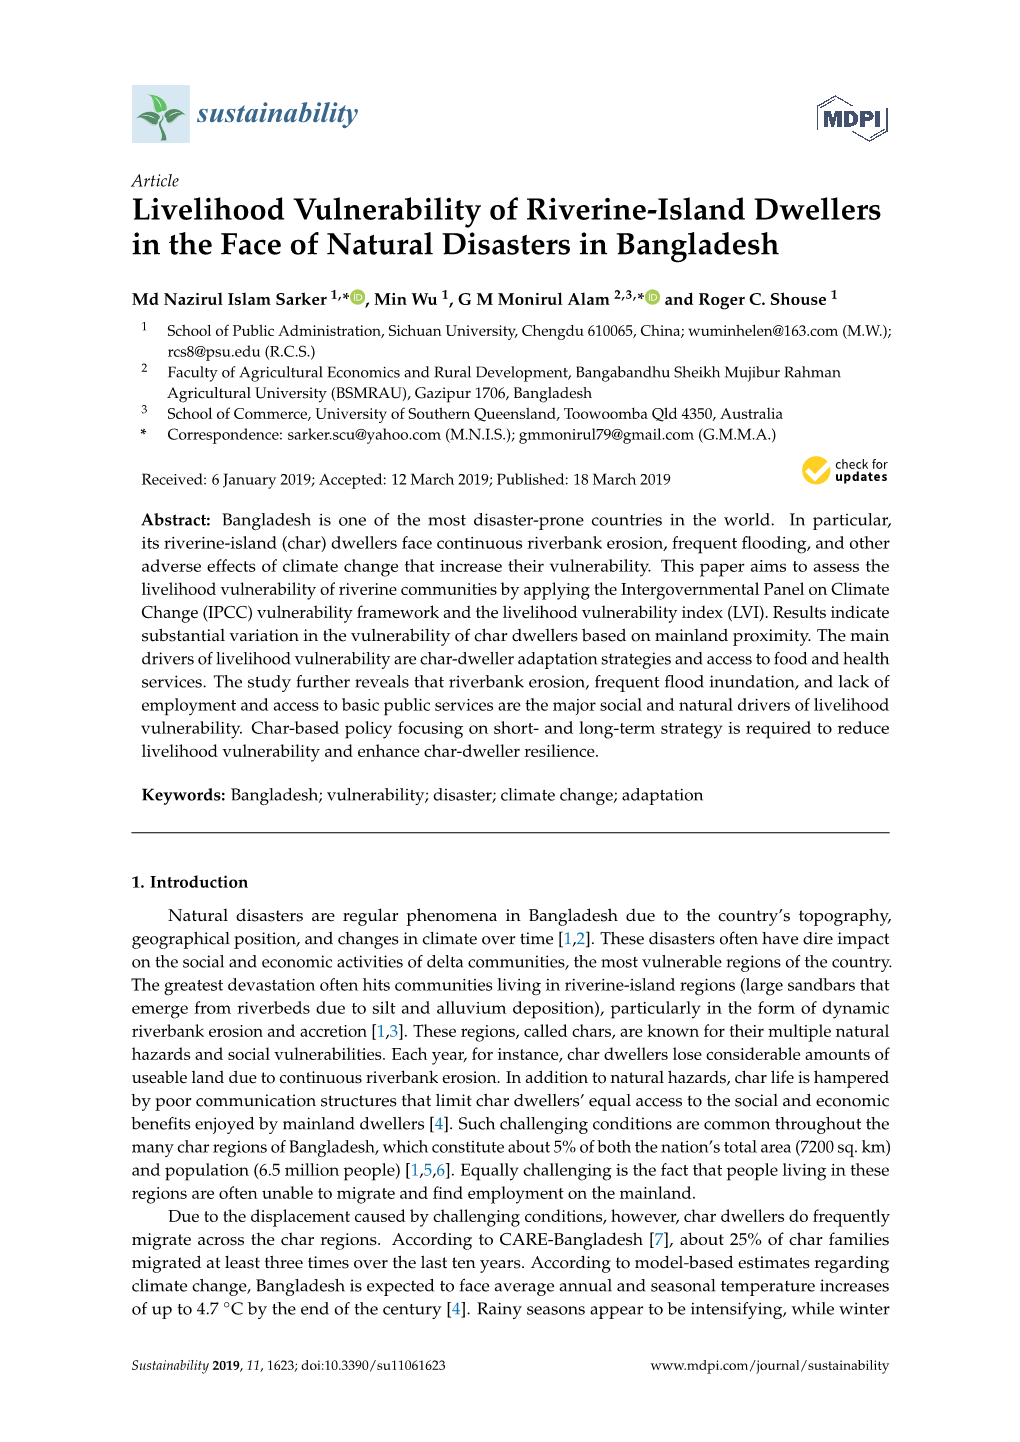 Livelihood Vulnerability of Riverine-Island Dwellers in the Face of Natural Disasters in Bangladesh